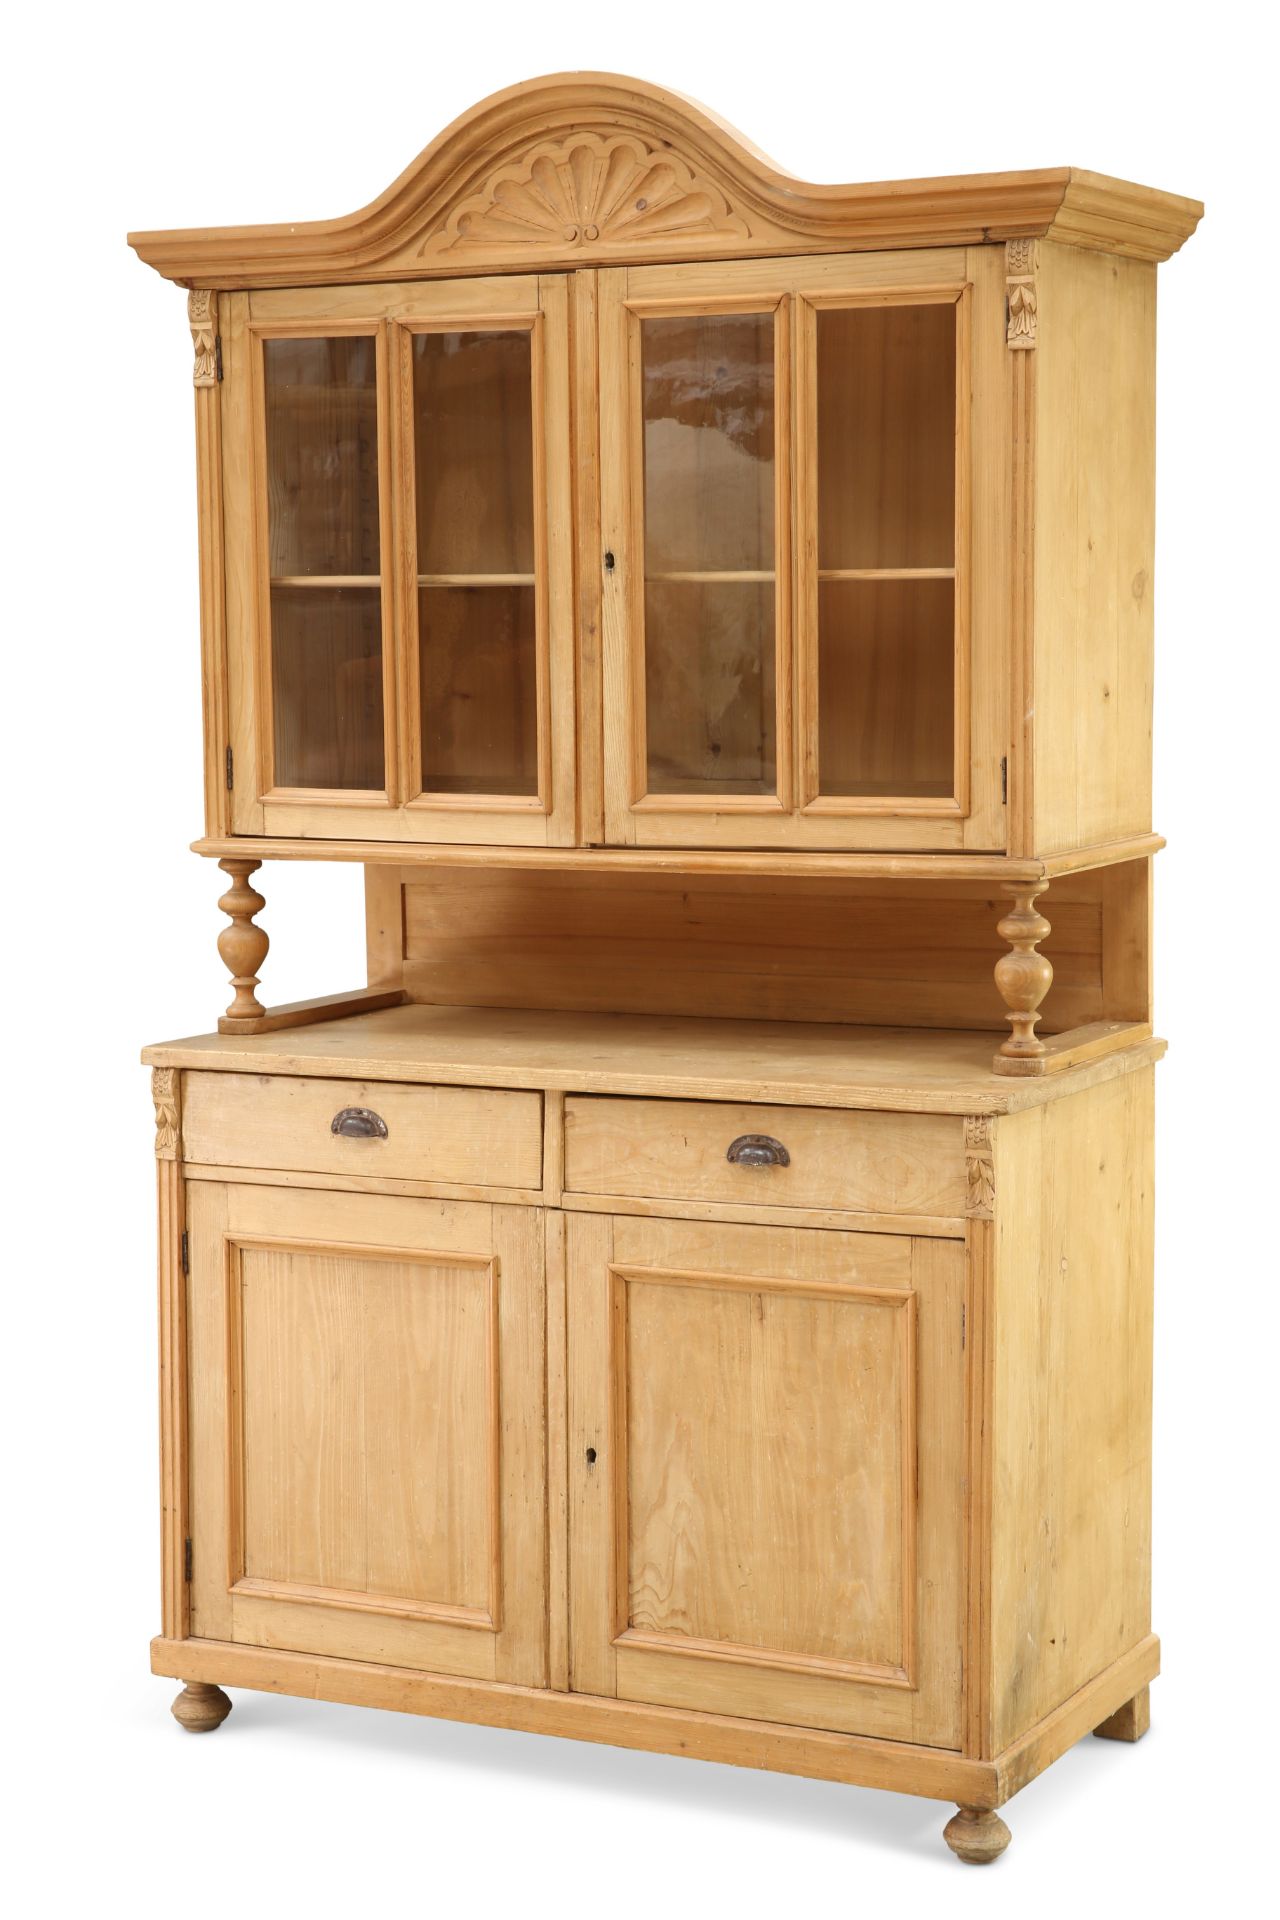 A LATE 19TH CENTURY CONTINENTAL PINE DRESSER